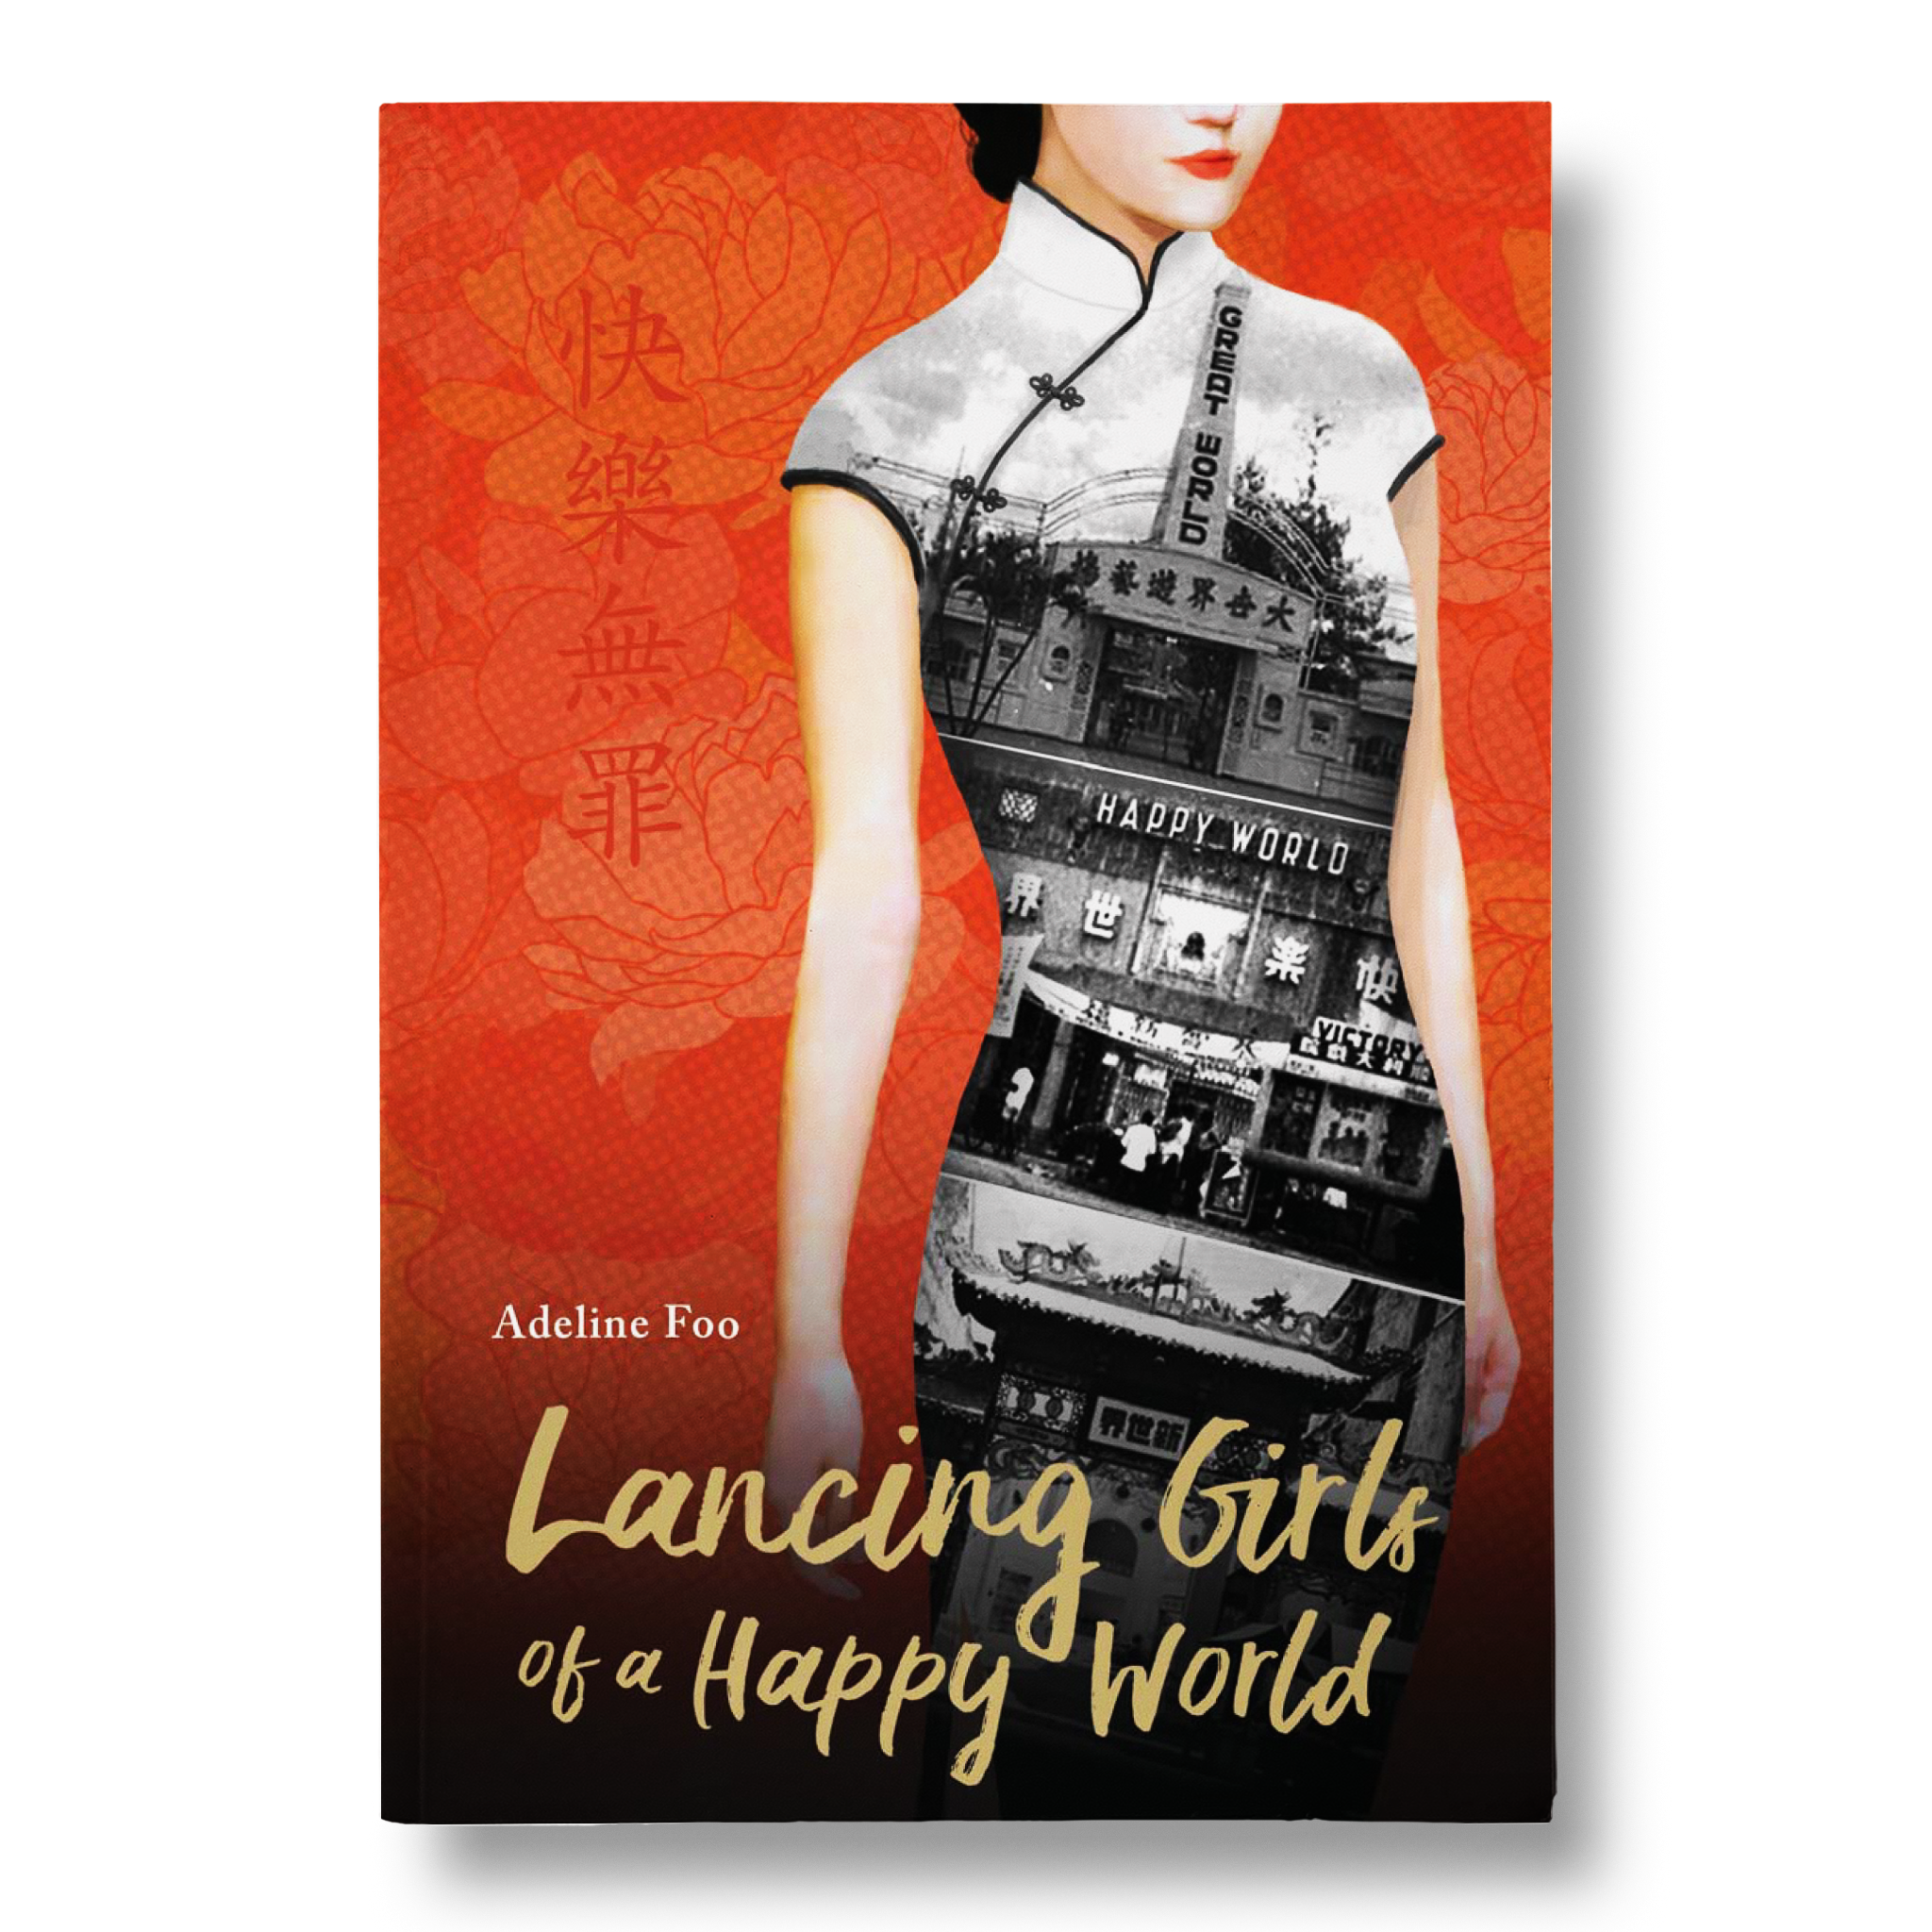 Lancing Girls of a Happy World